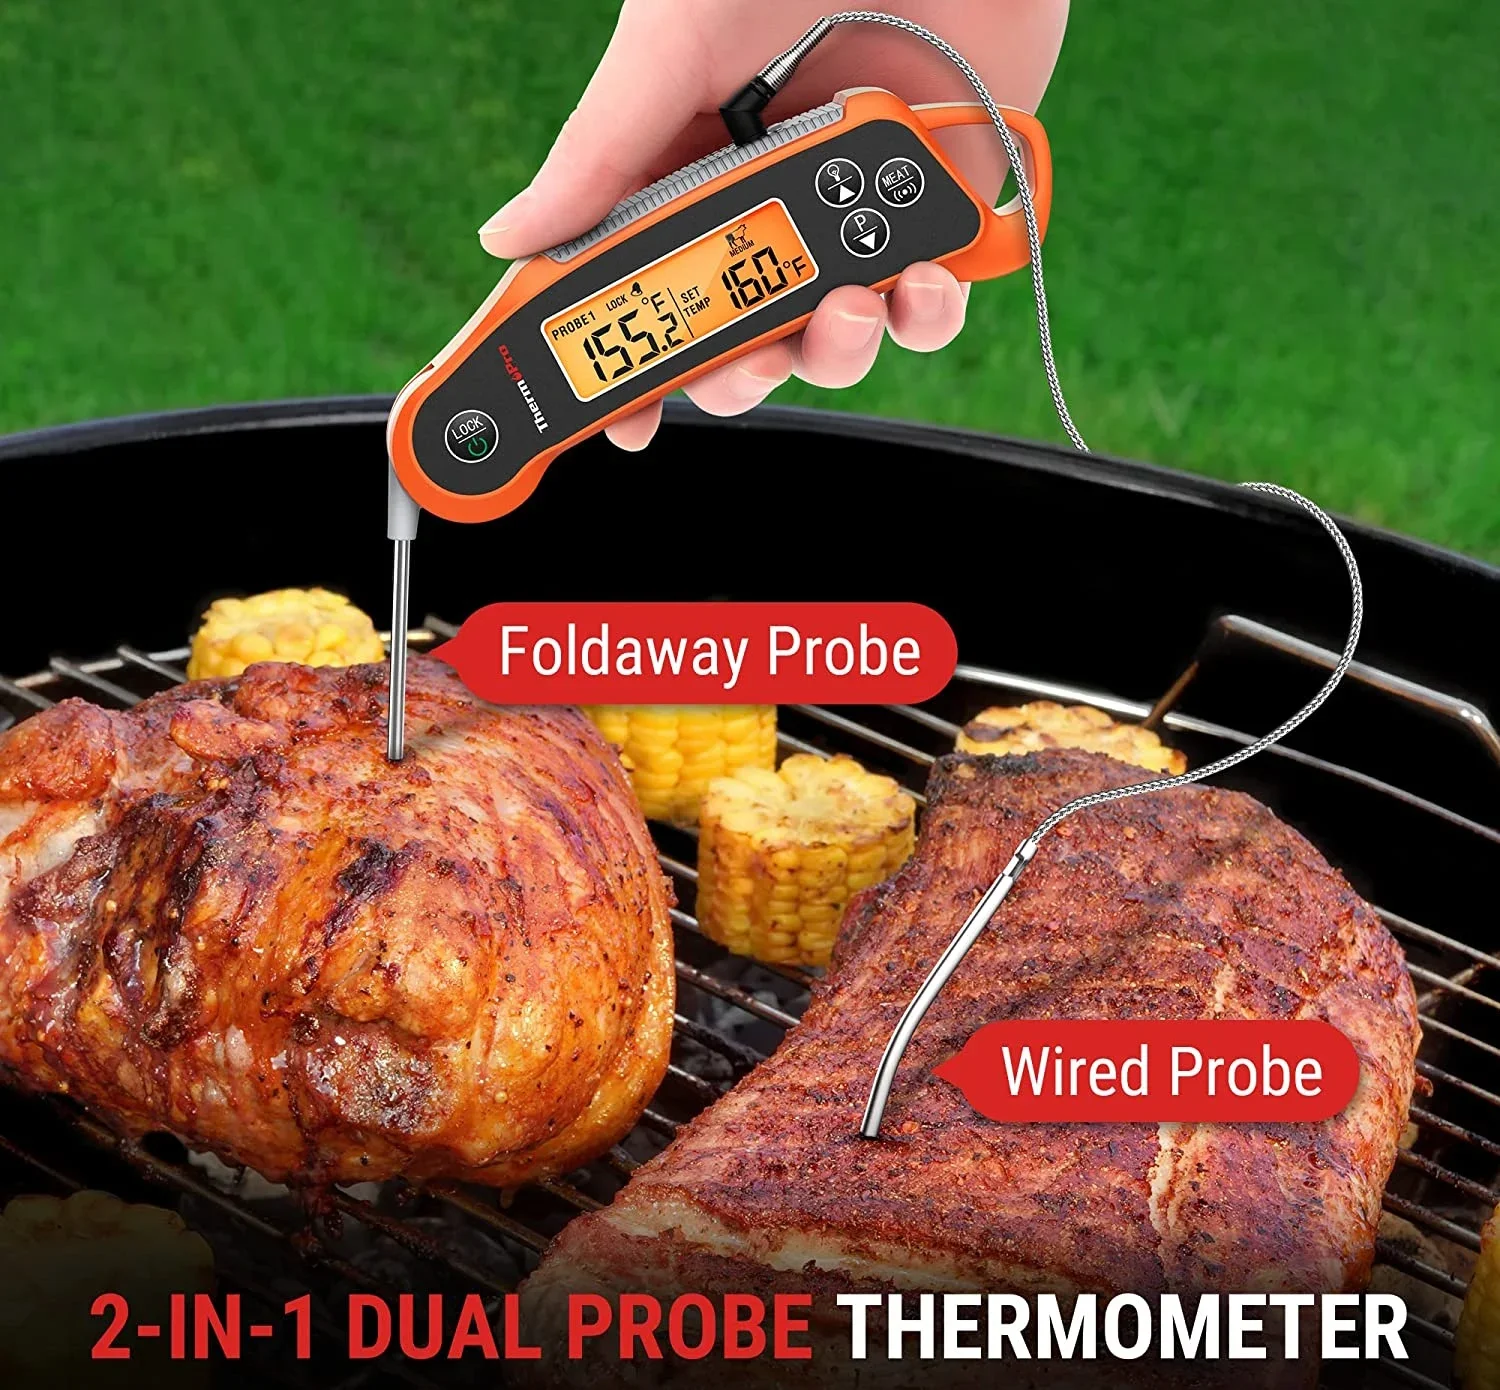 ThermoPro Launches Smart Dual-Probe Meat Thermometer